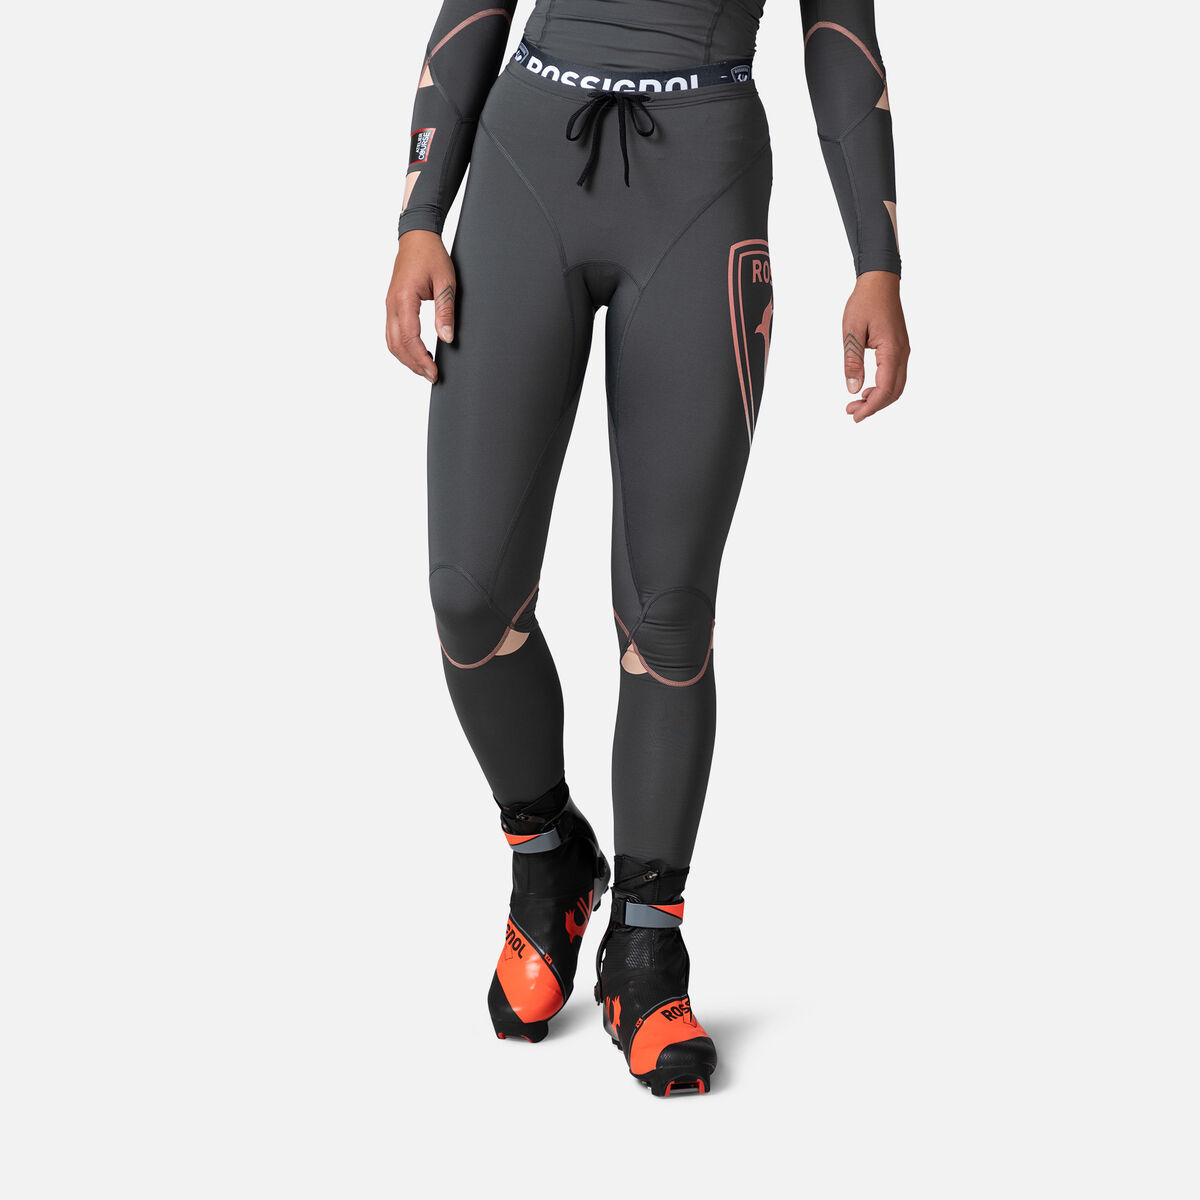 Women's Infini Compression Race Tights